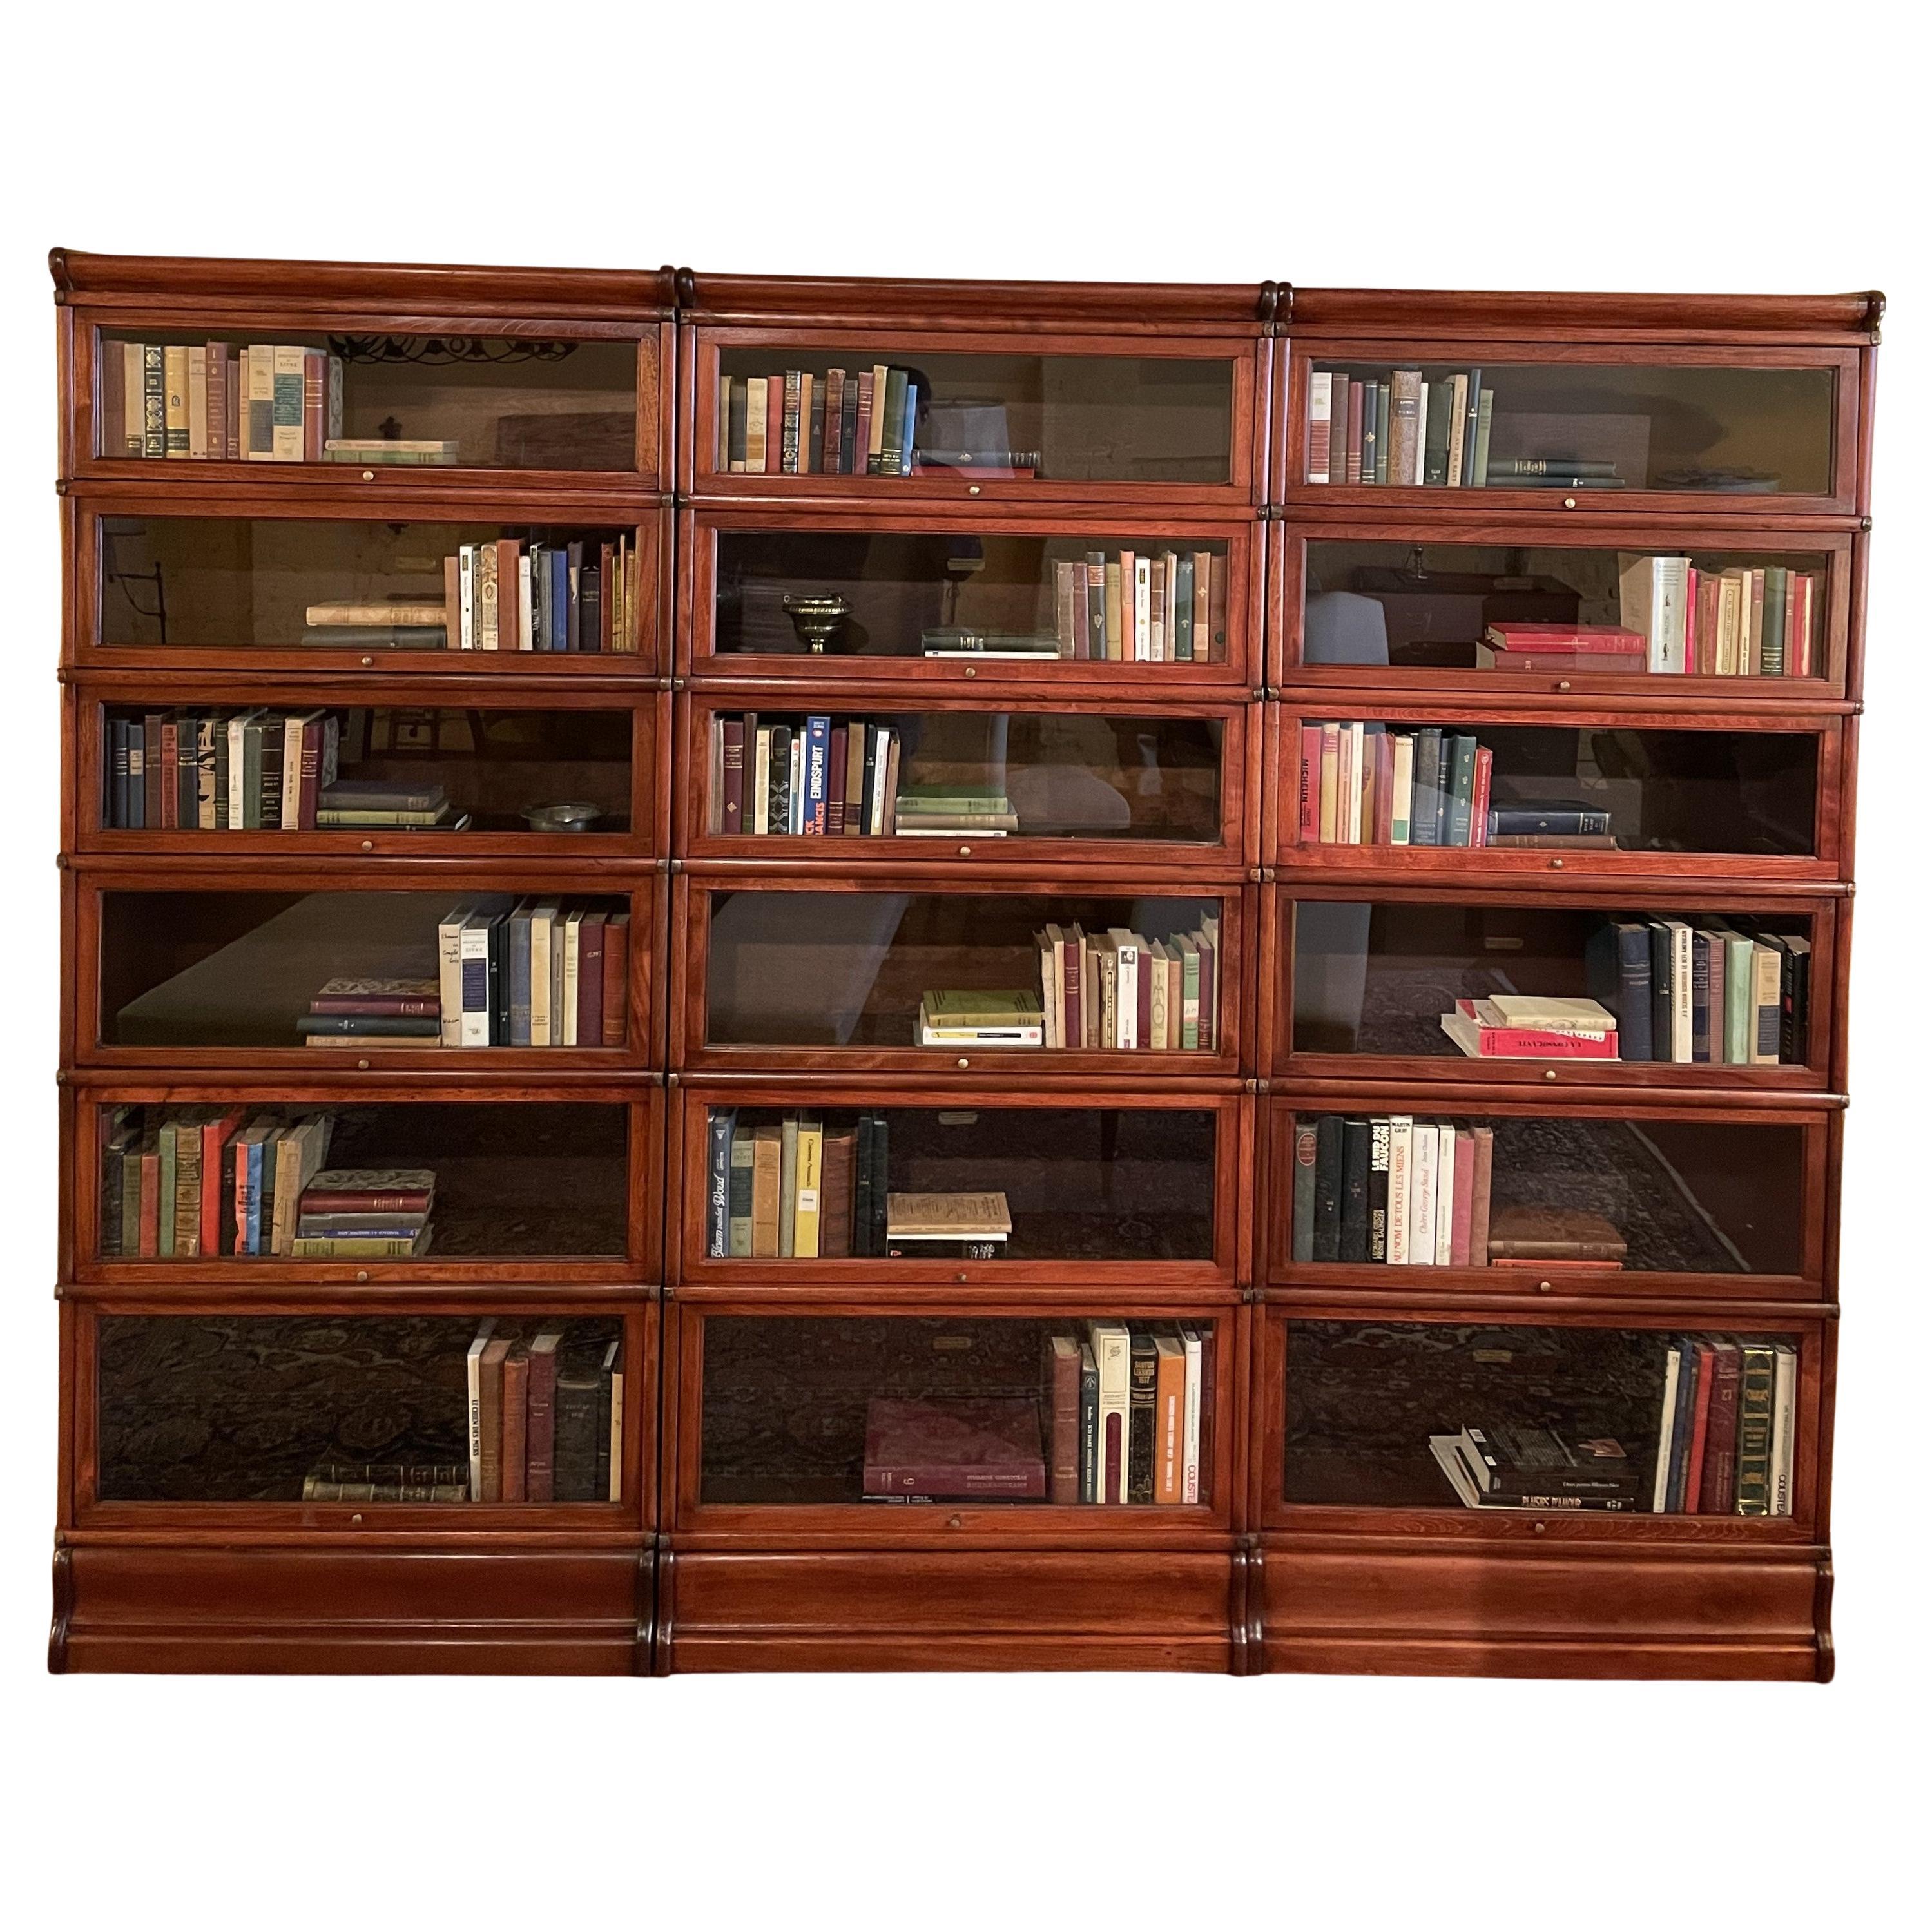 A Set Of 3 Globe Wernicke Bookcase In Mahogany From The 19th Century